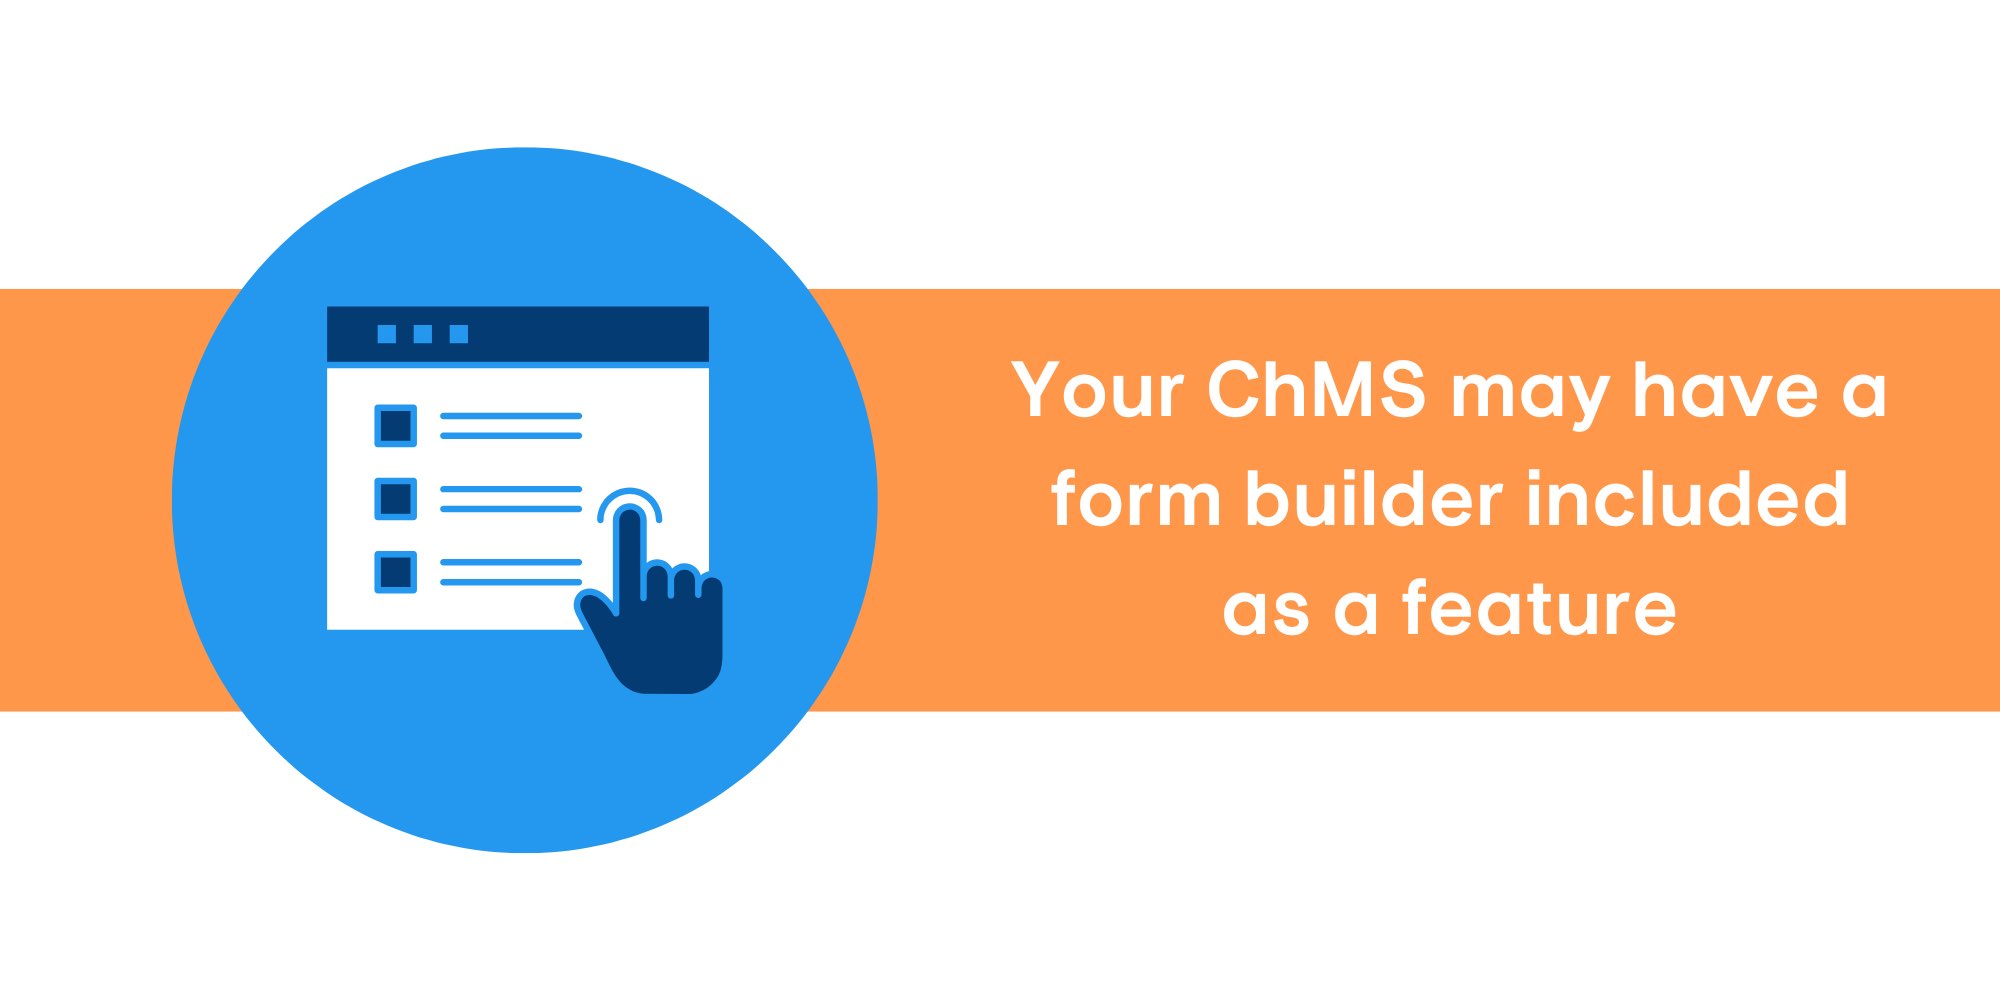 Your Church management software has a form builder included